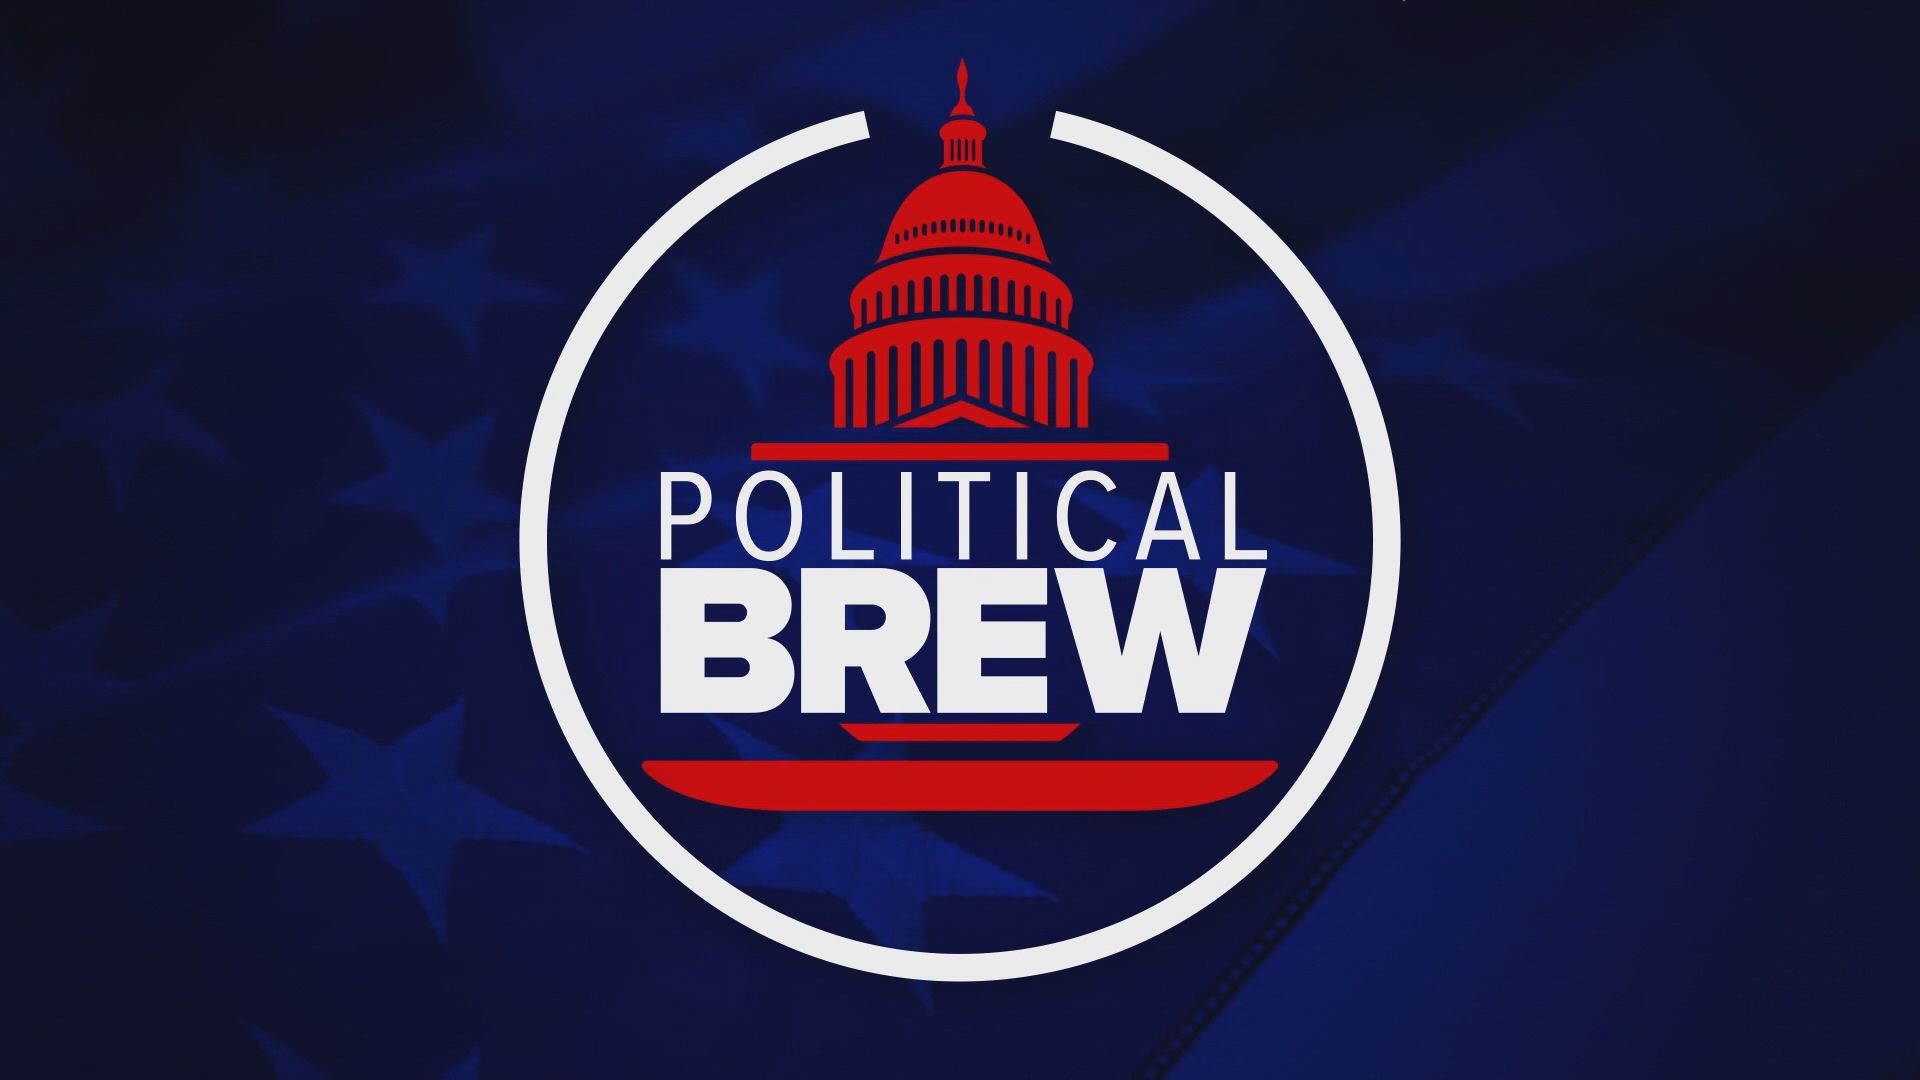 NEWS CENTER Maine's political analysts Phil Harriman and Betsy Sweet weigh in on the major political issues of the week.